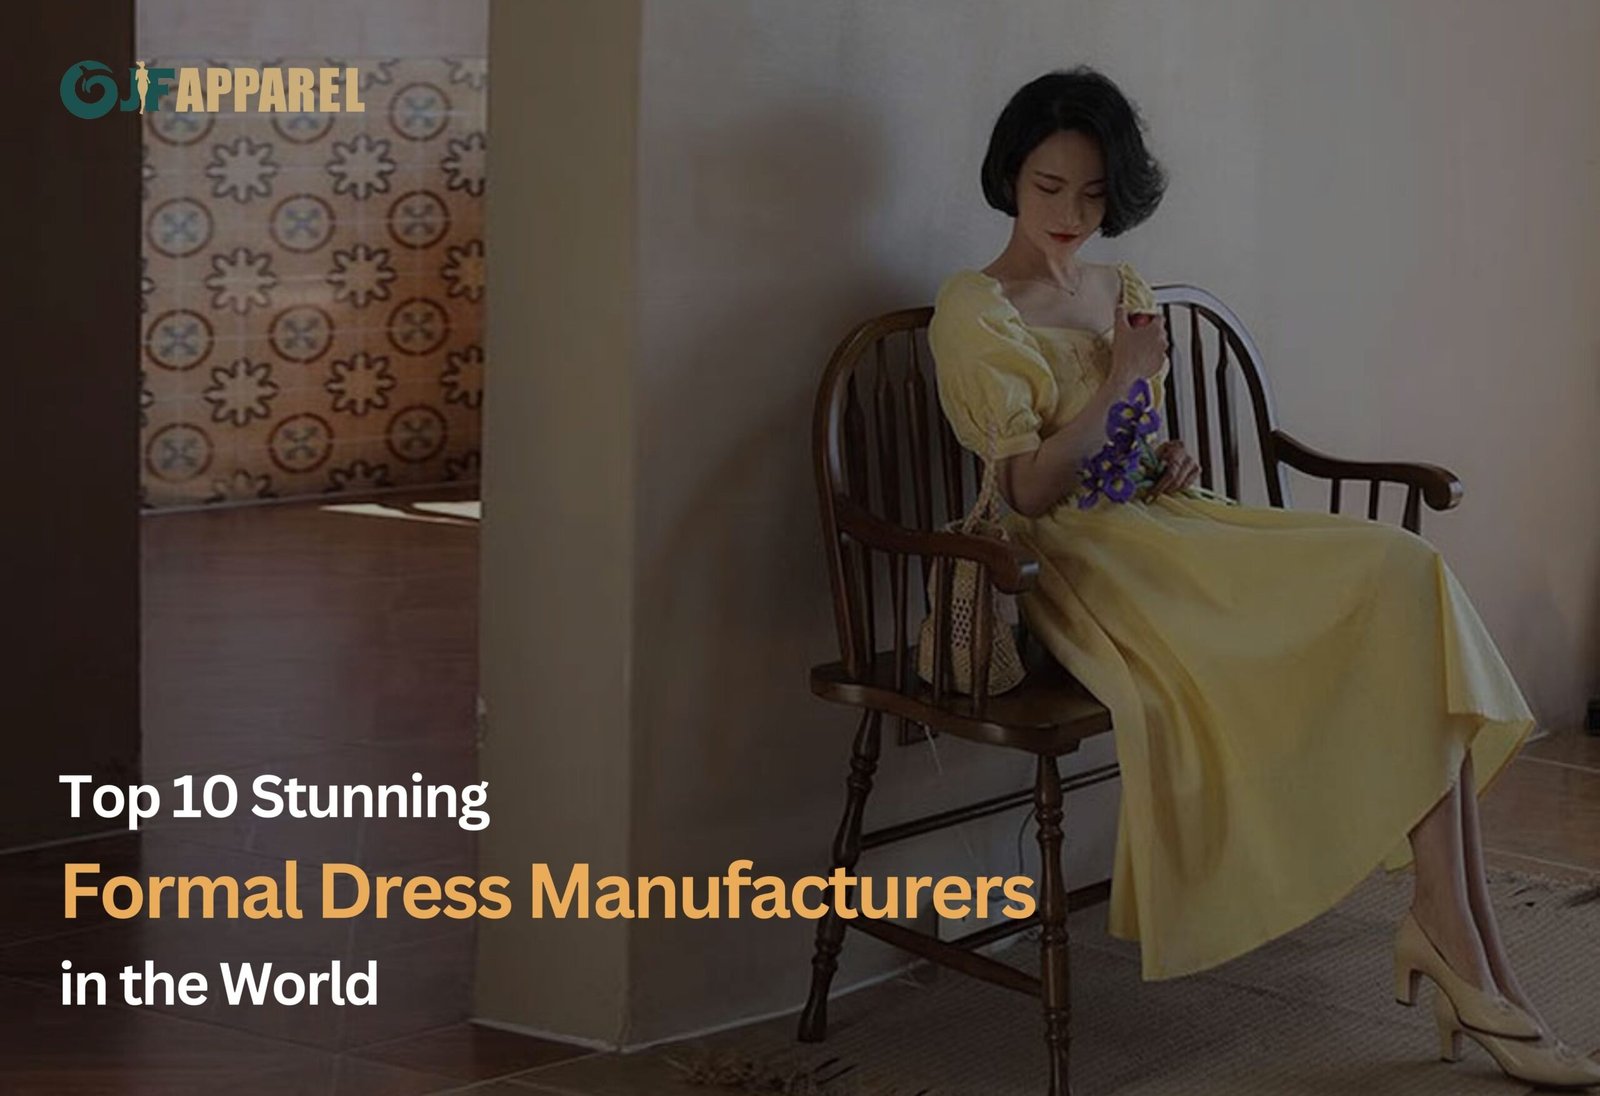 Discover the World’s Top 10 Stunning Formal Dress Manufacturers